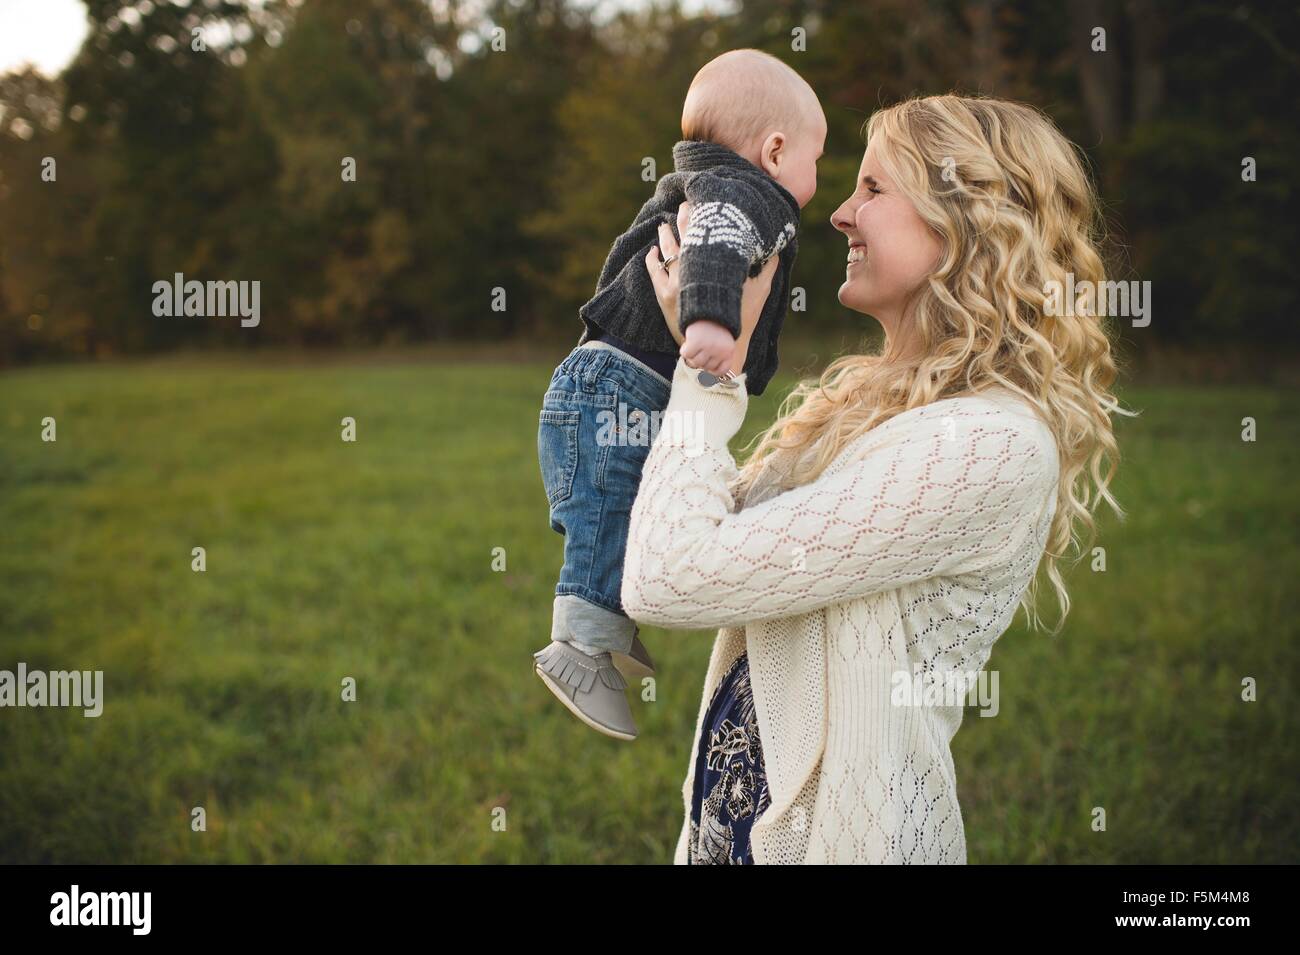 Mid adult woman holding up baby son in field Stock Photo